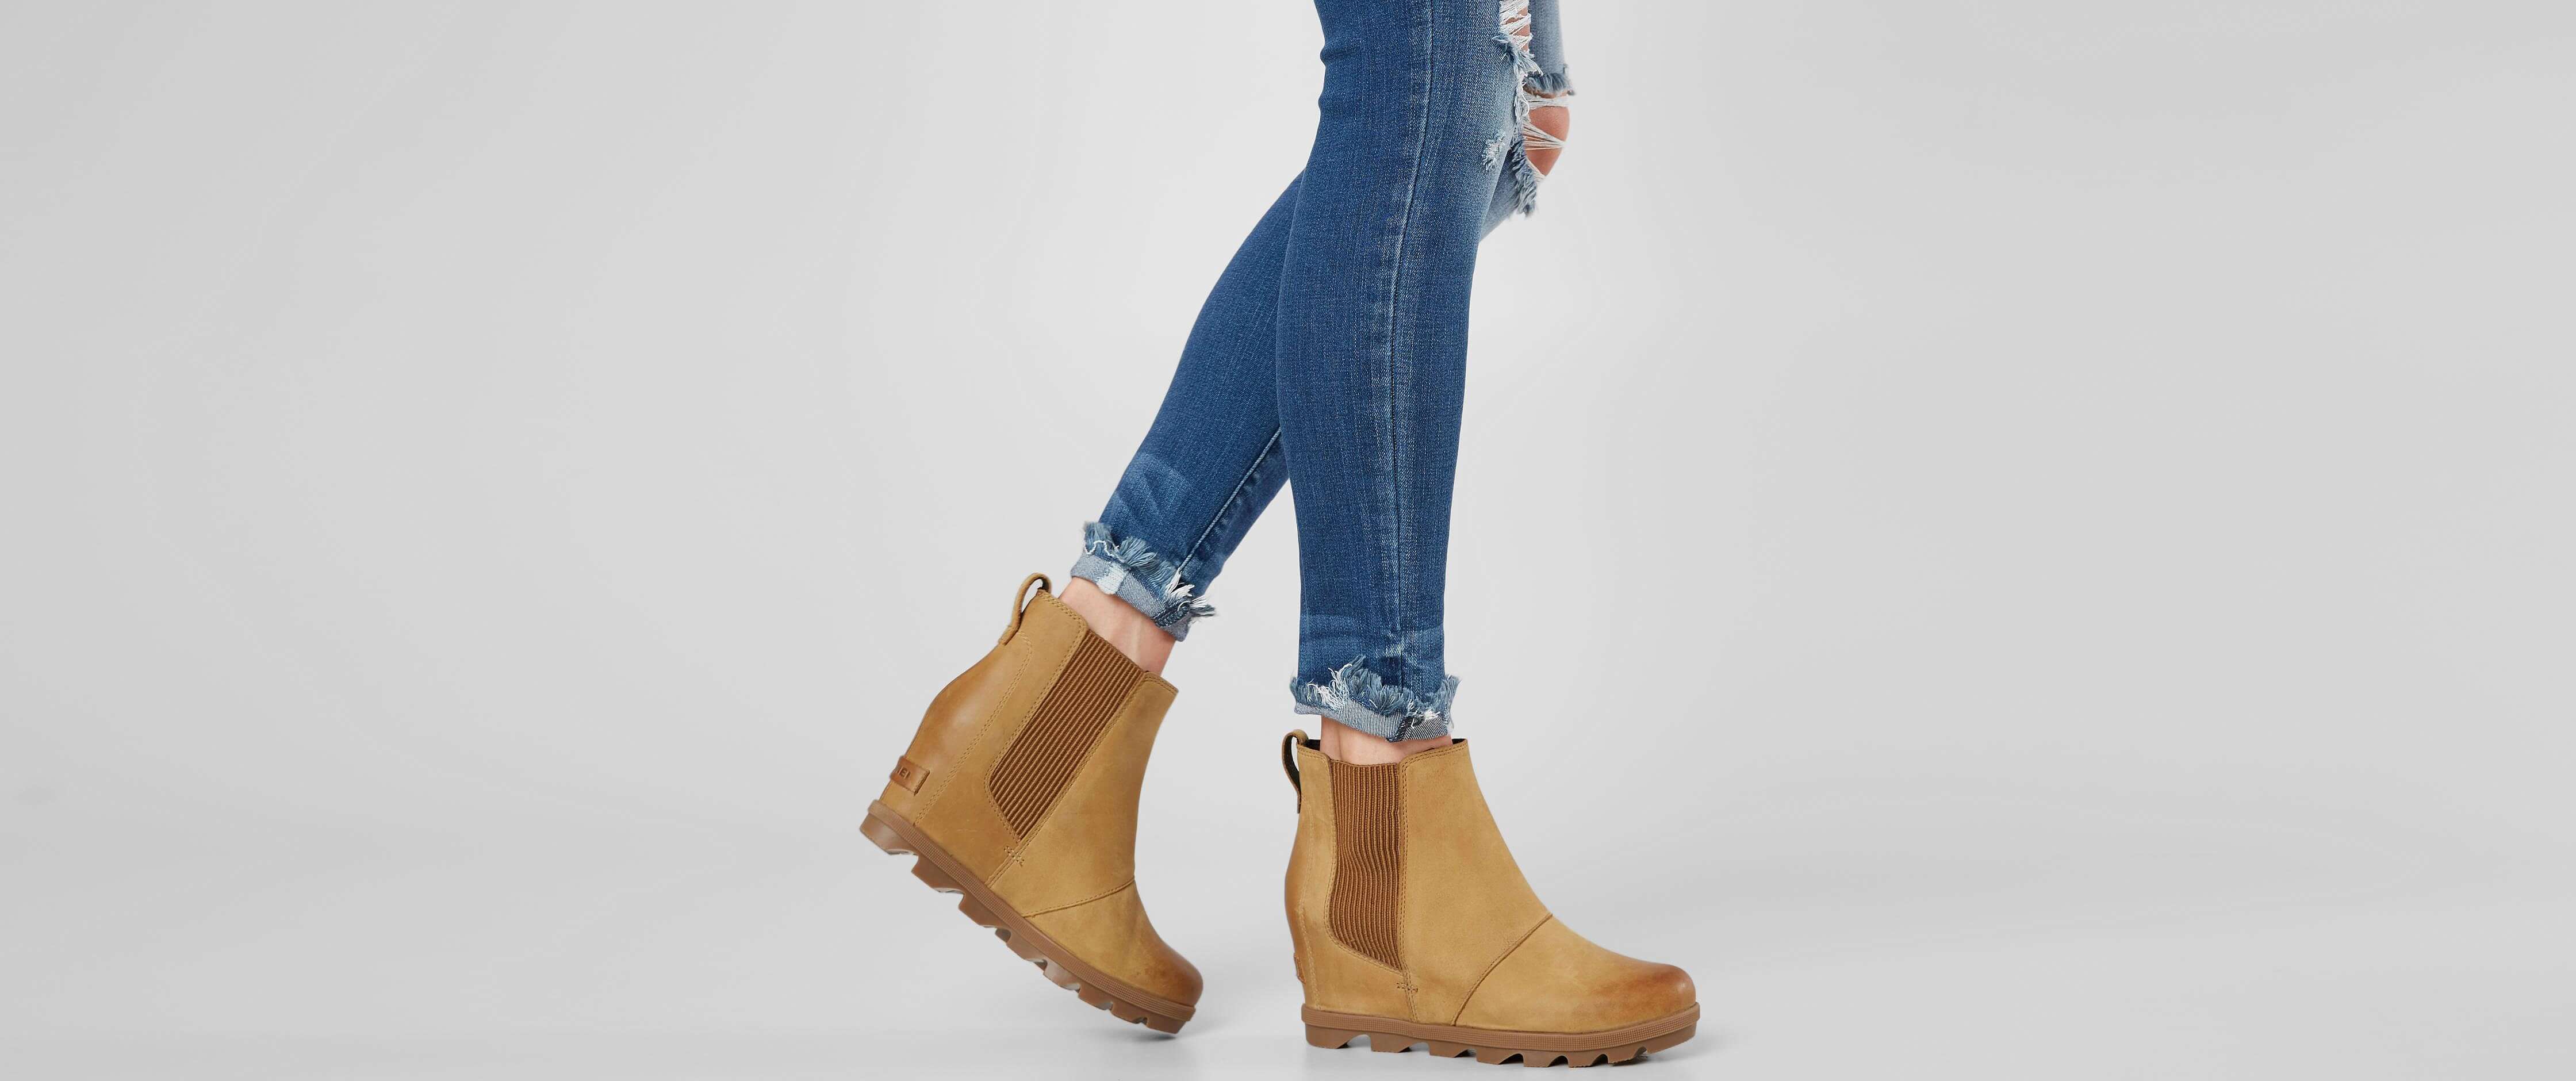 joan of arctic leather wedge boot